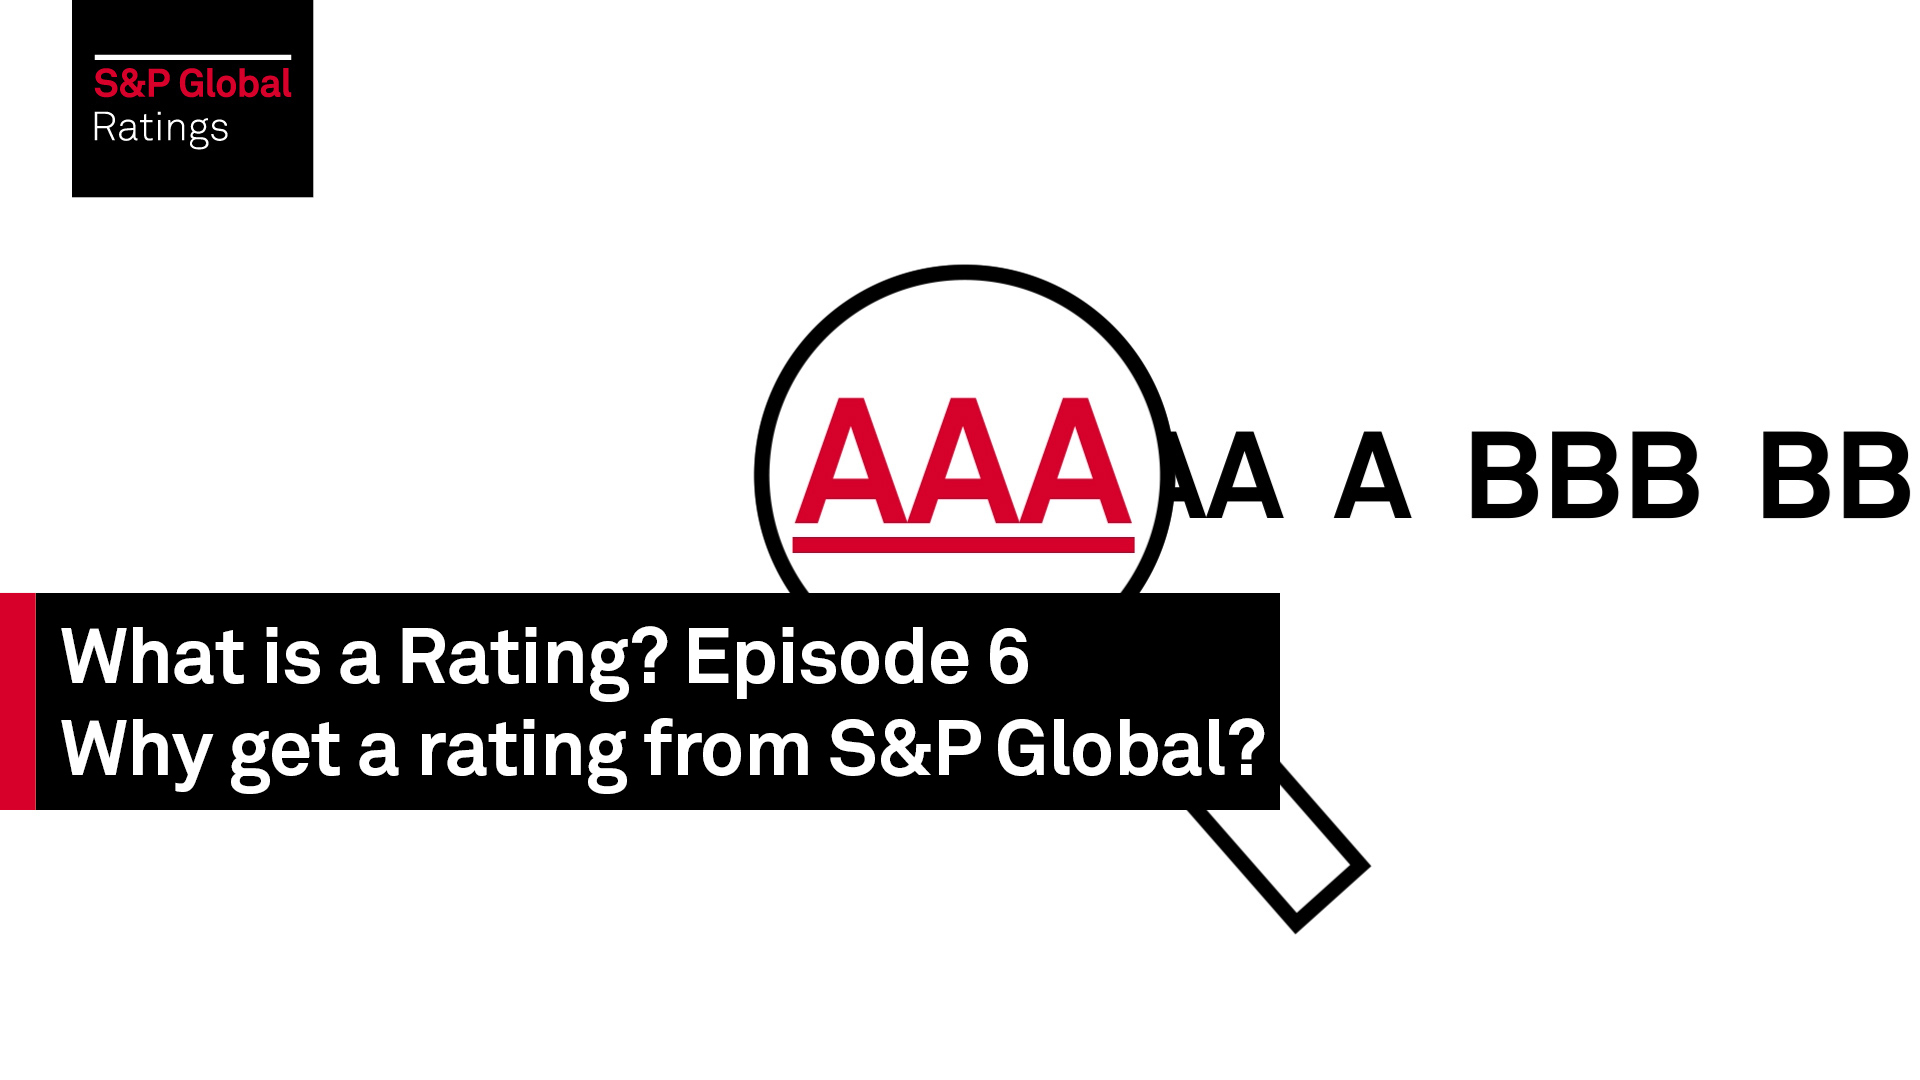 S p banking. S&P Global ratings. S P Global ratings шкала. BBB rating. S&P Global logo.